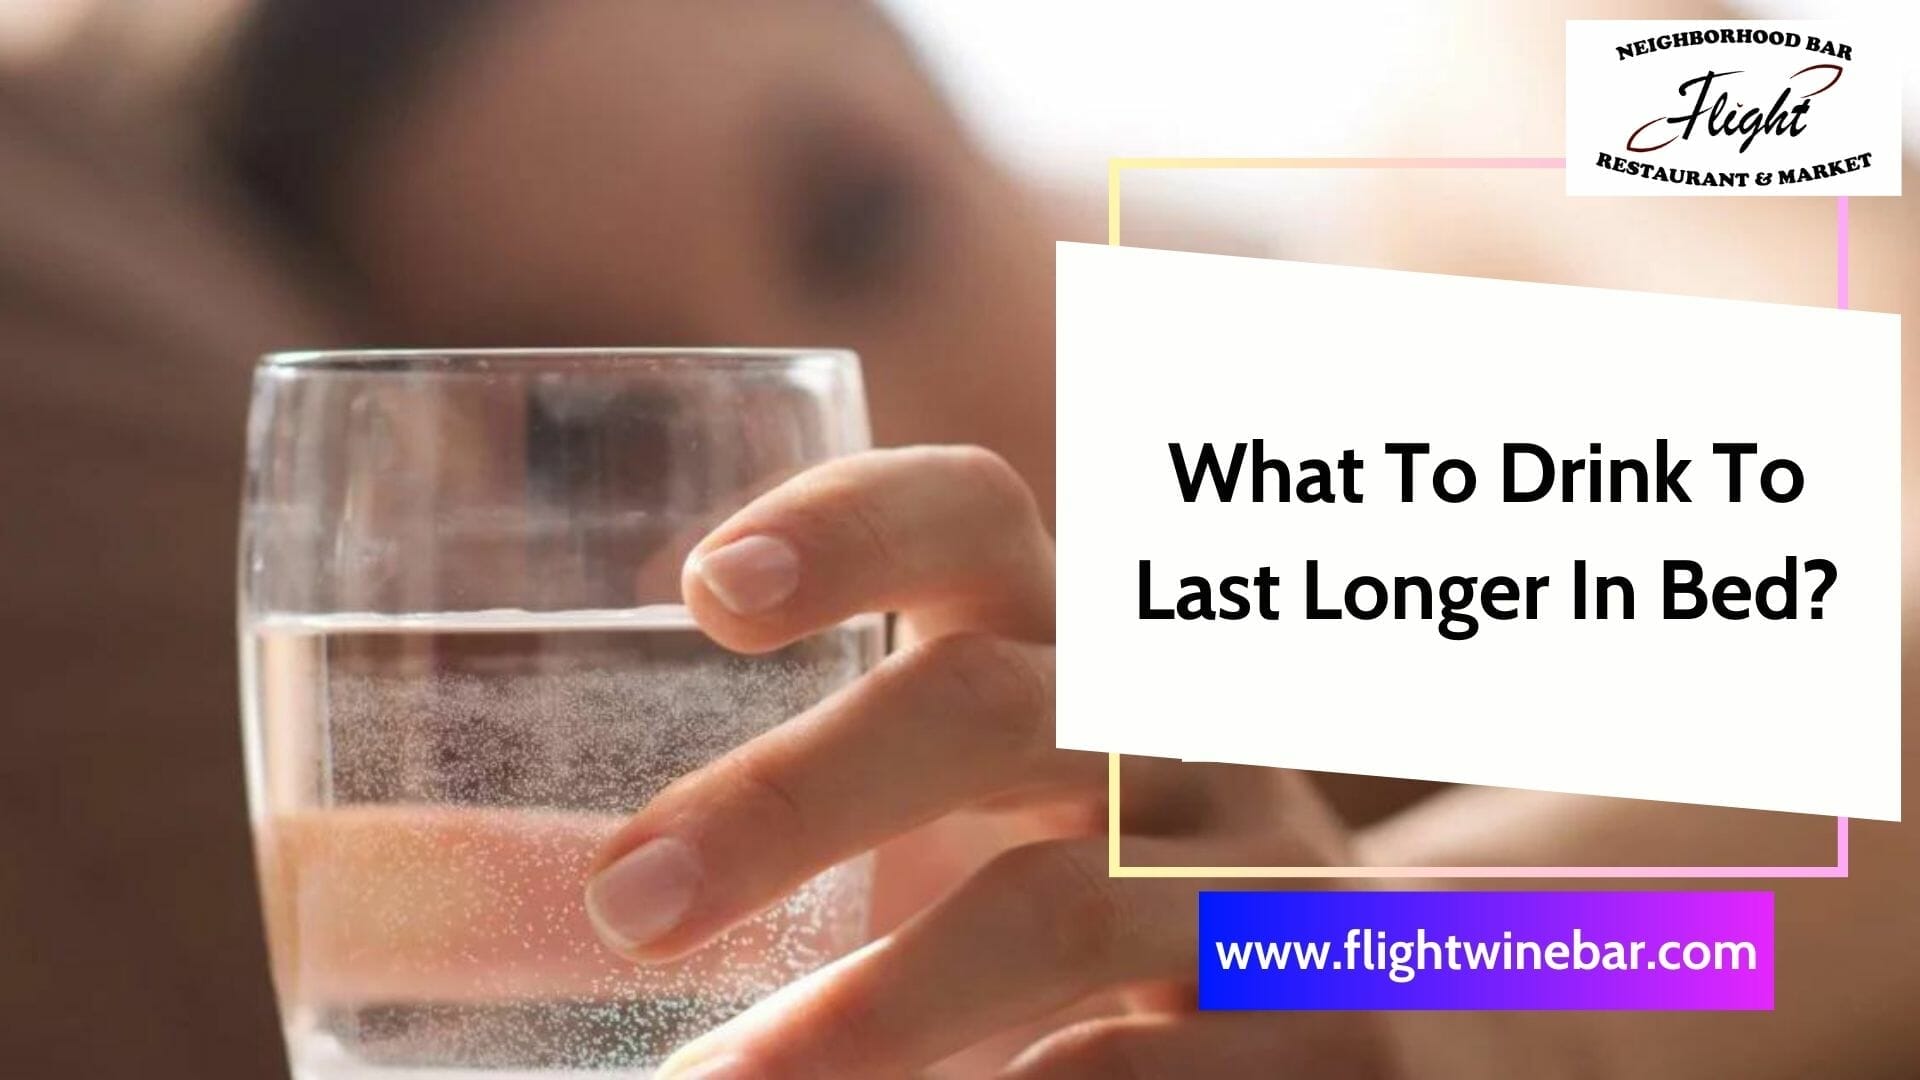 What To Drink To Last Longer In Bed